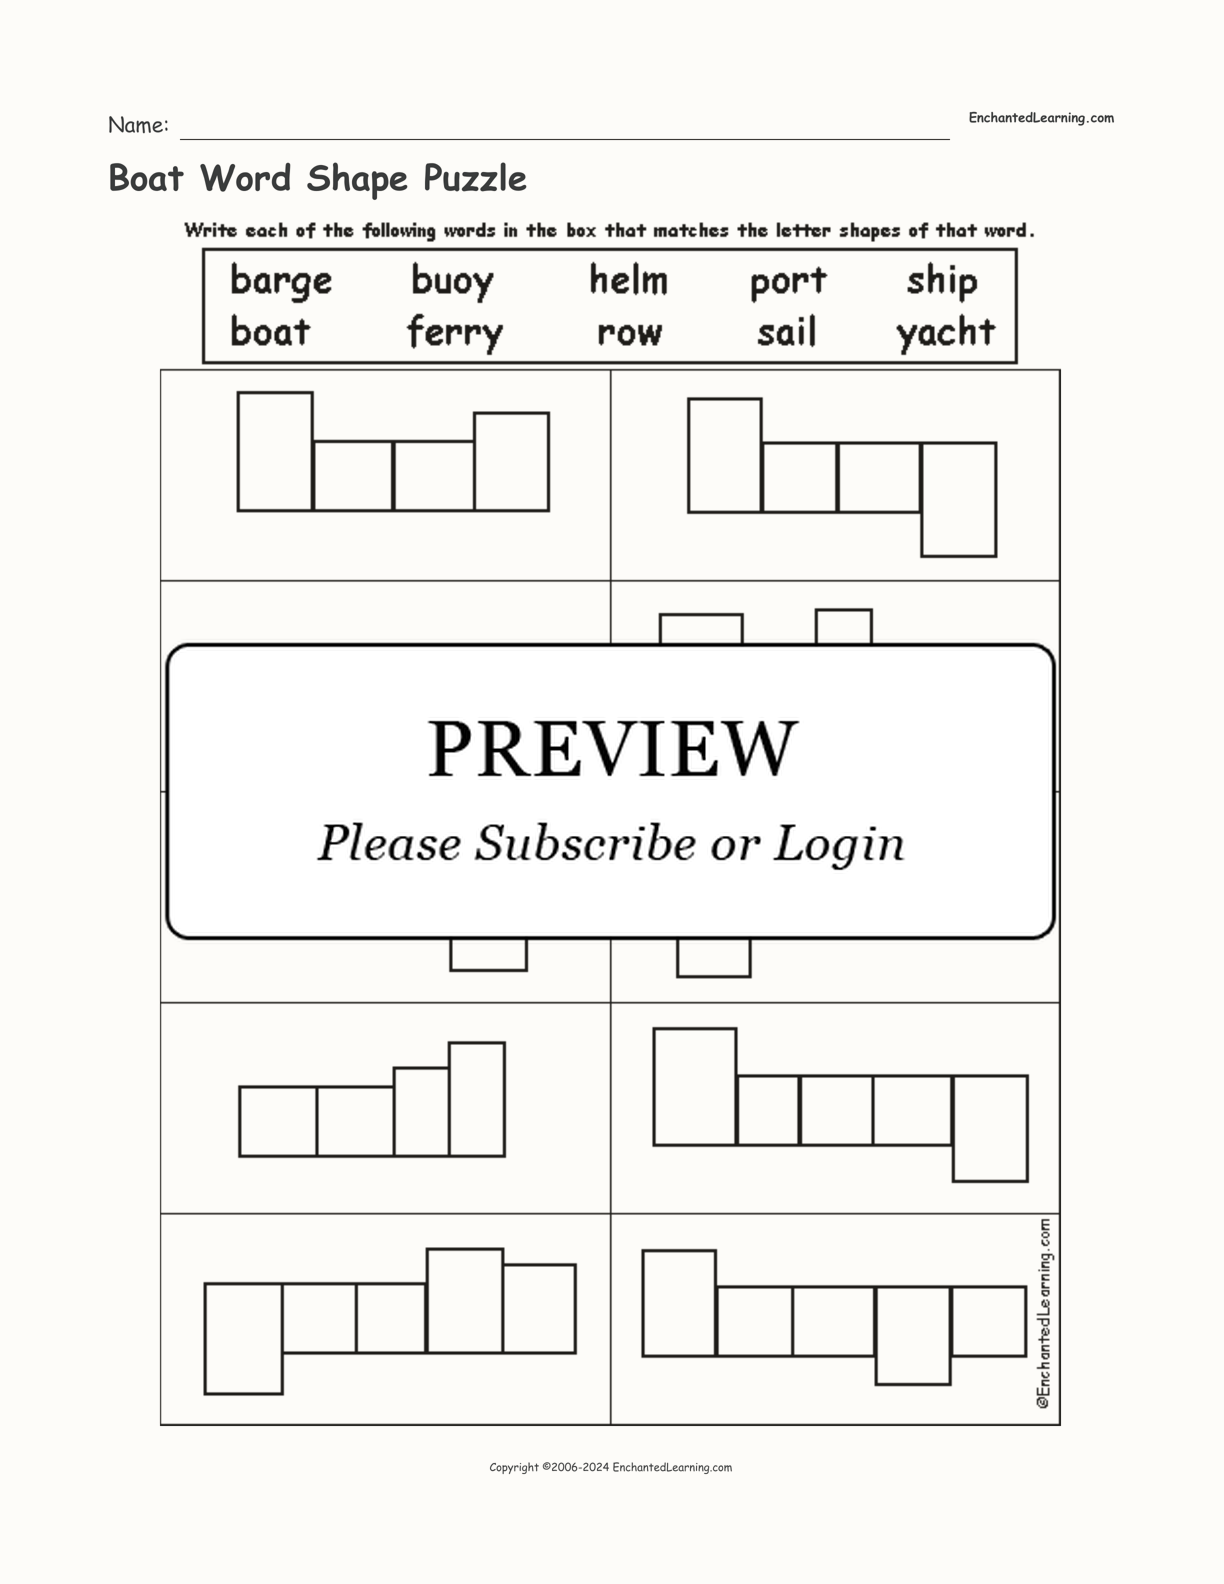 Boat Word Shape Puzzle interactive worksheet page 1